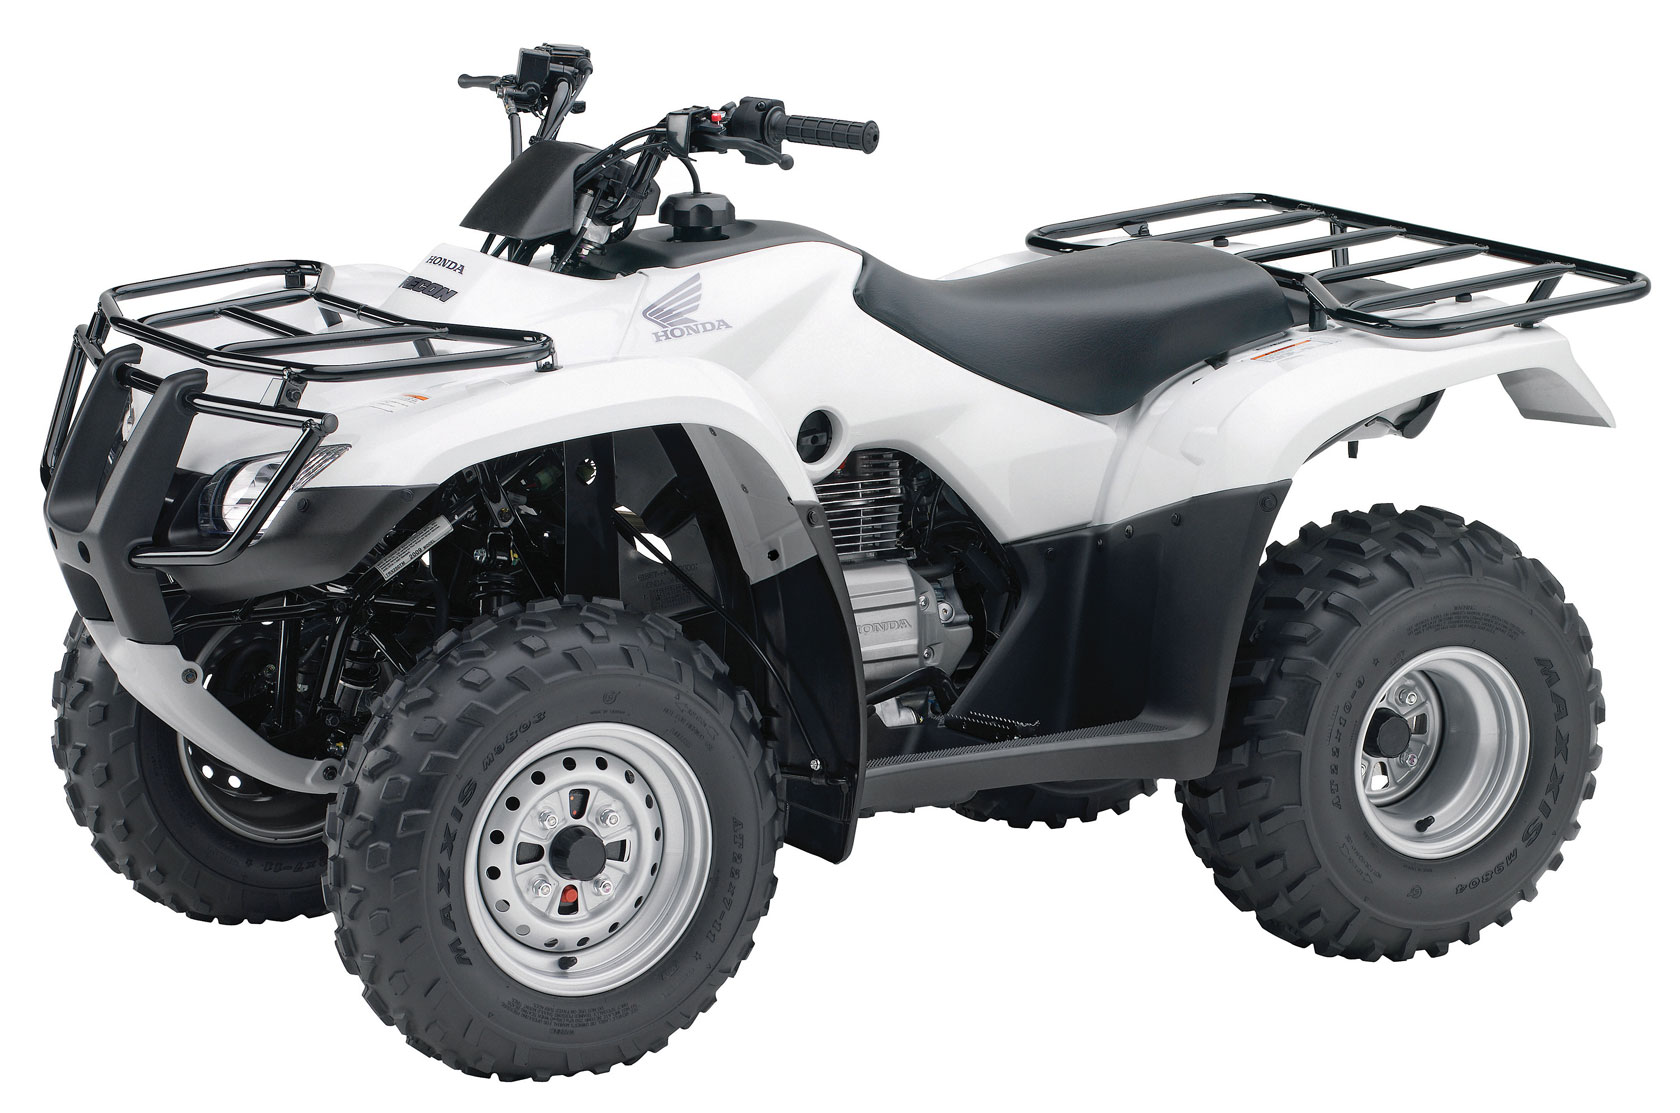 World Of Powersports Inc Search Results Dirtbikes Powersports Honda